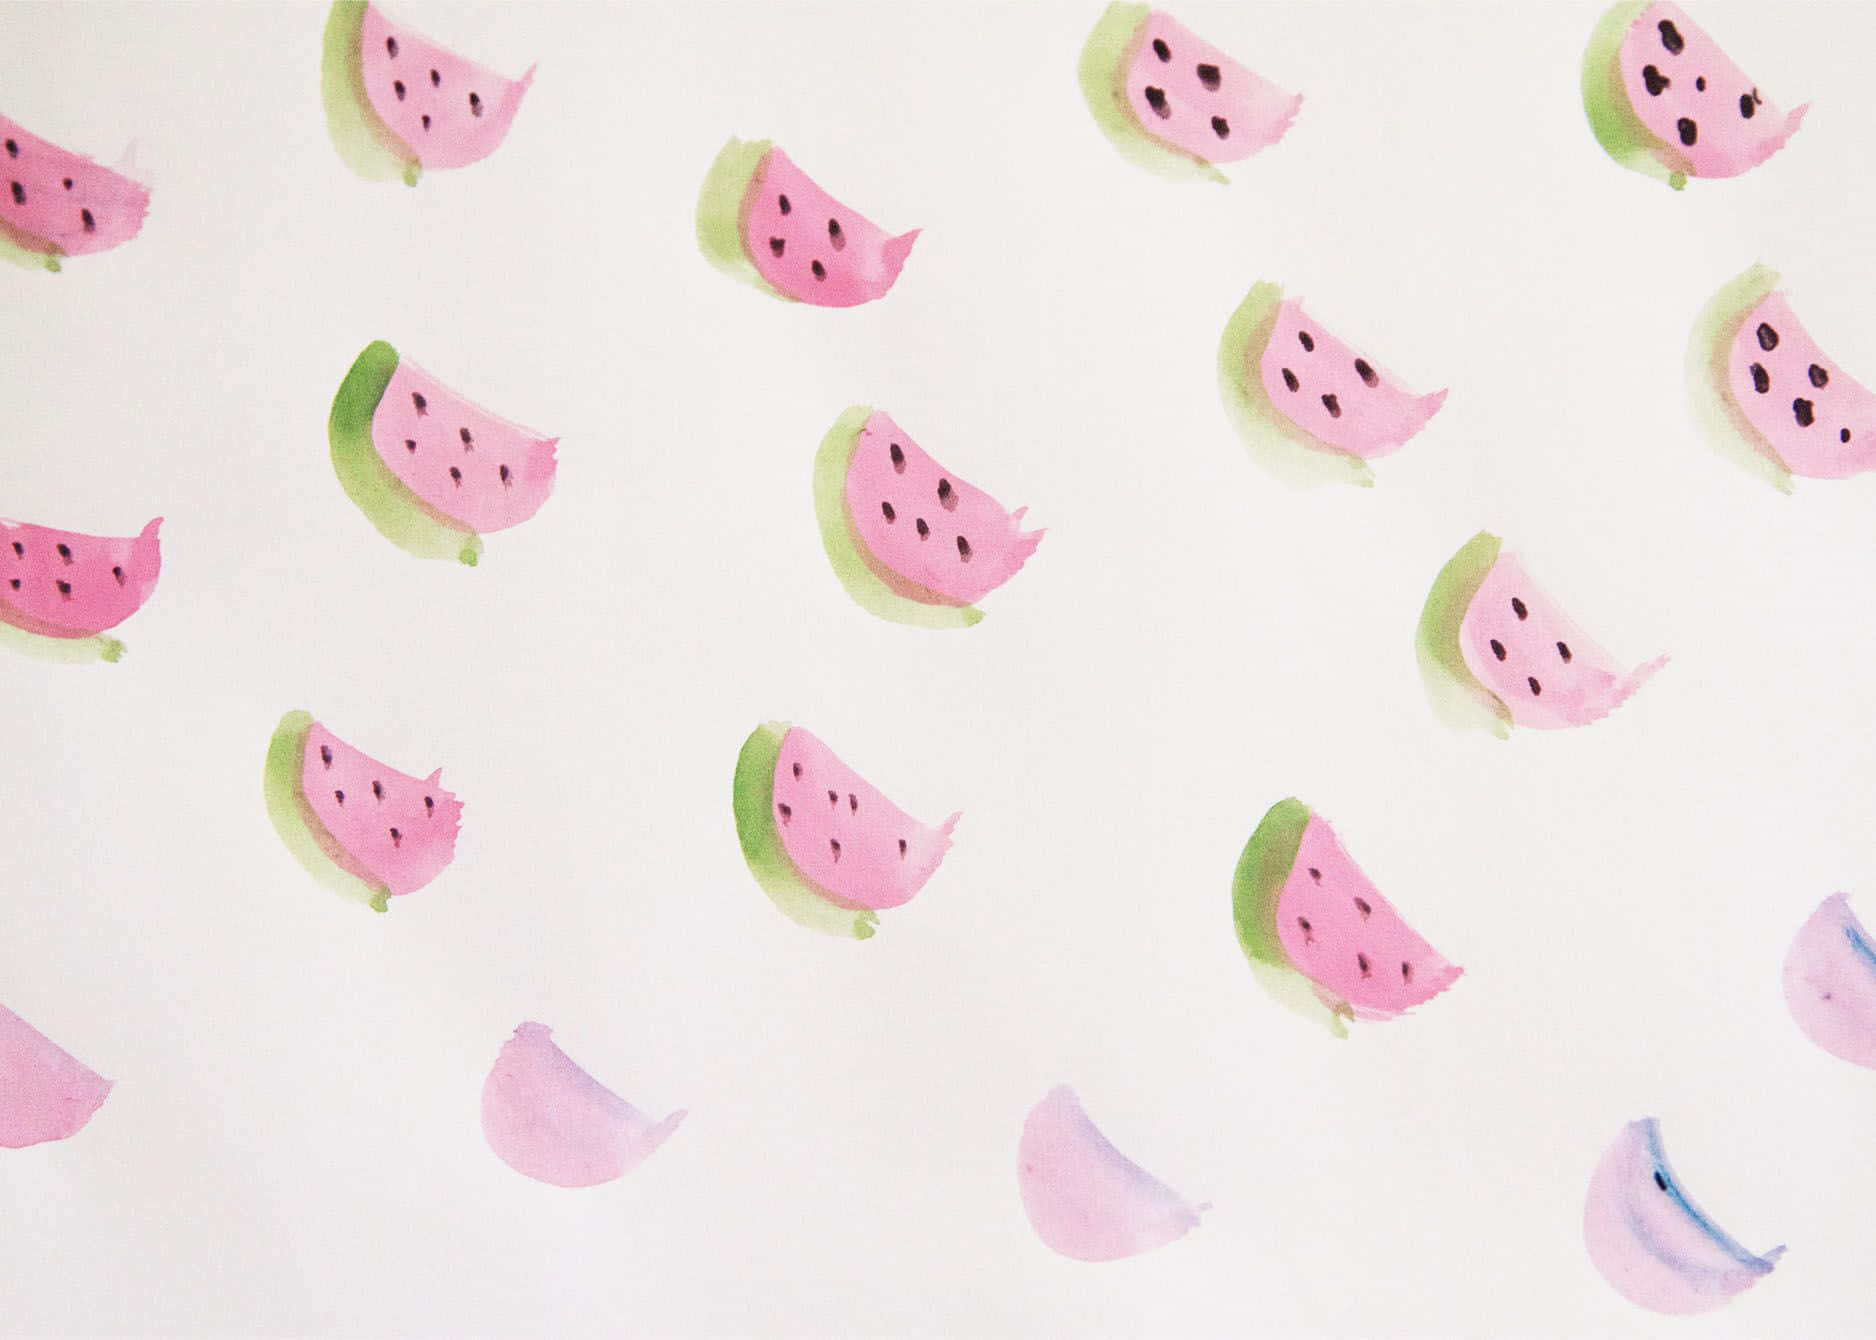 Colorful assortment of Kawaii fruit characters smiling happily Wallpaper